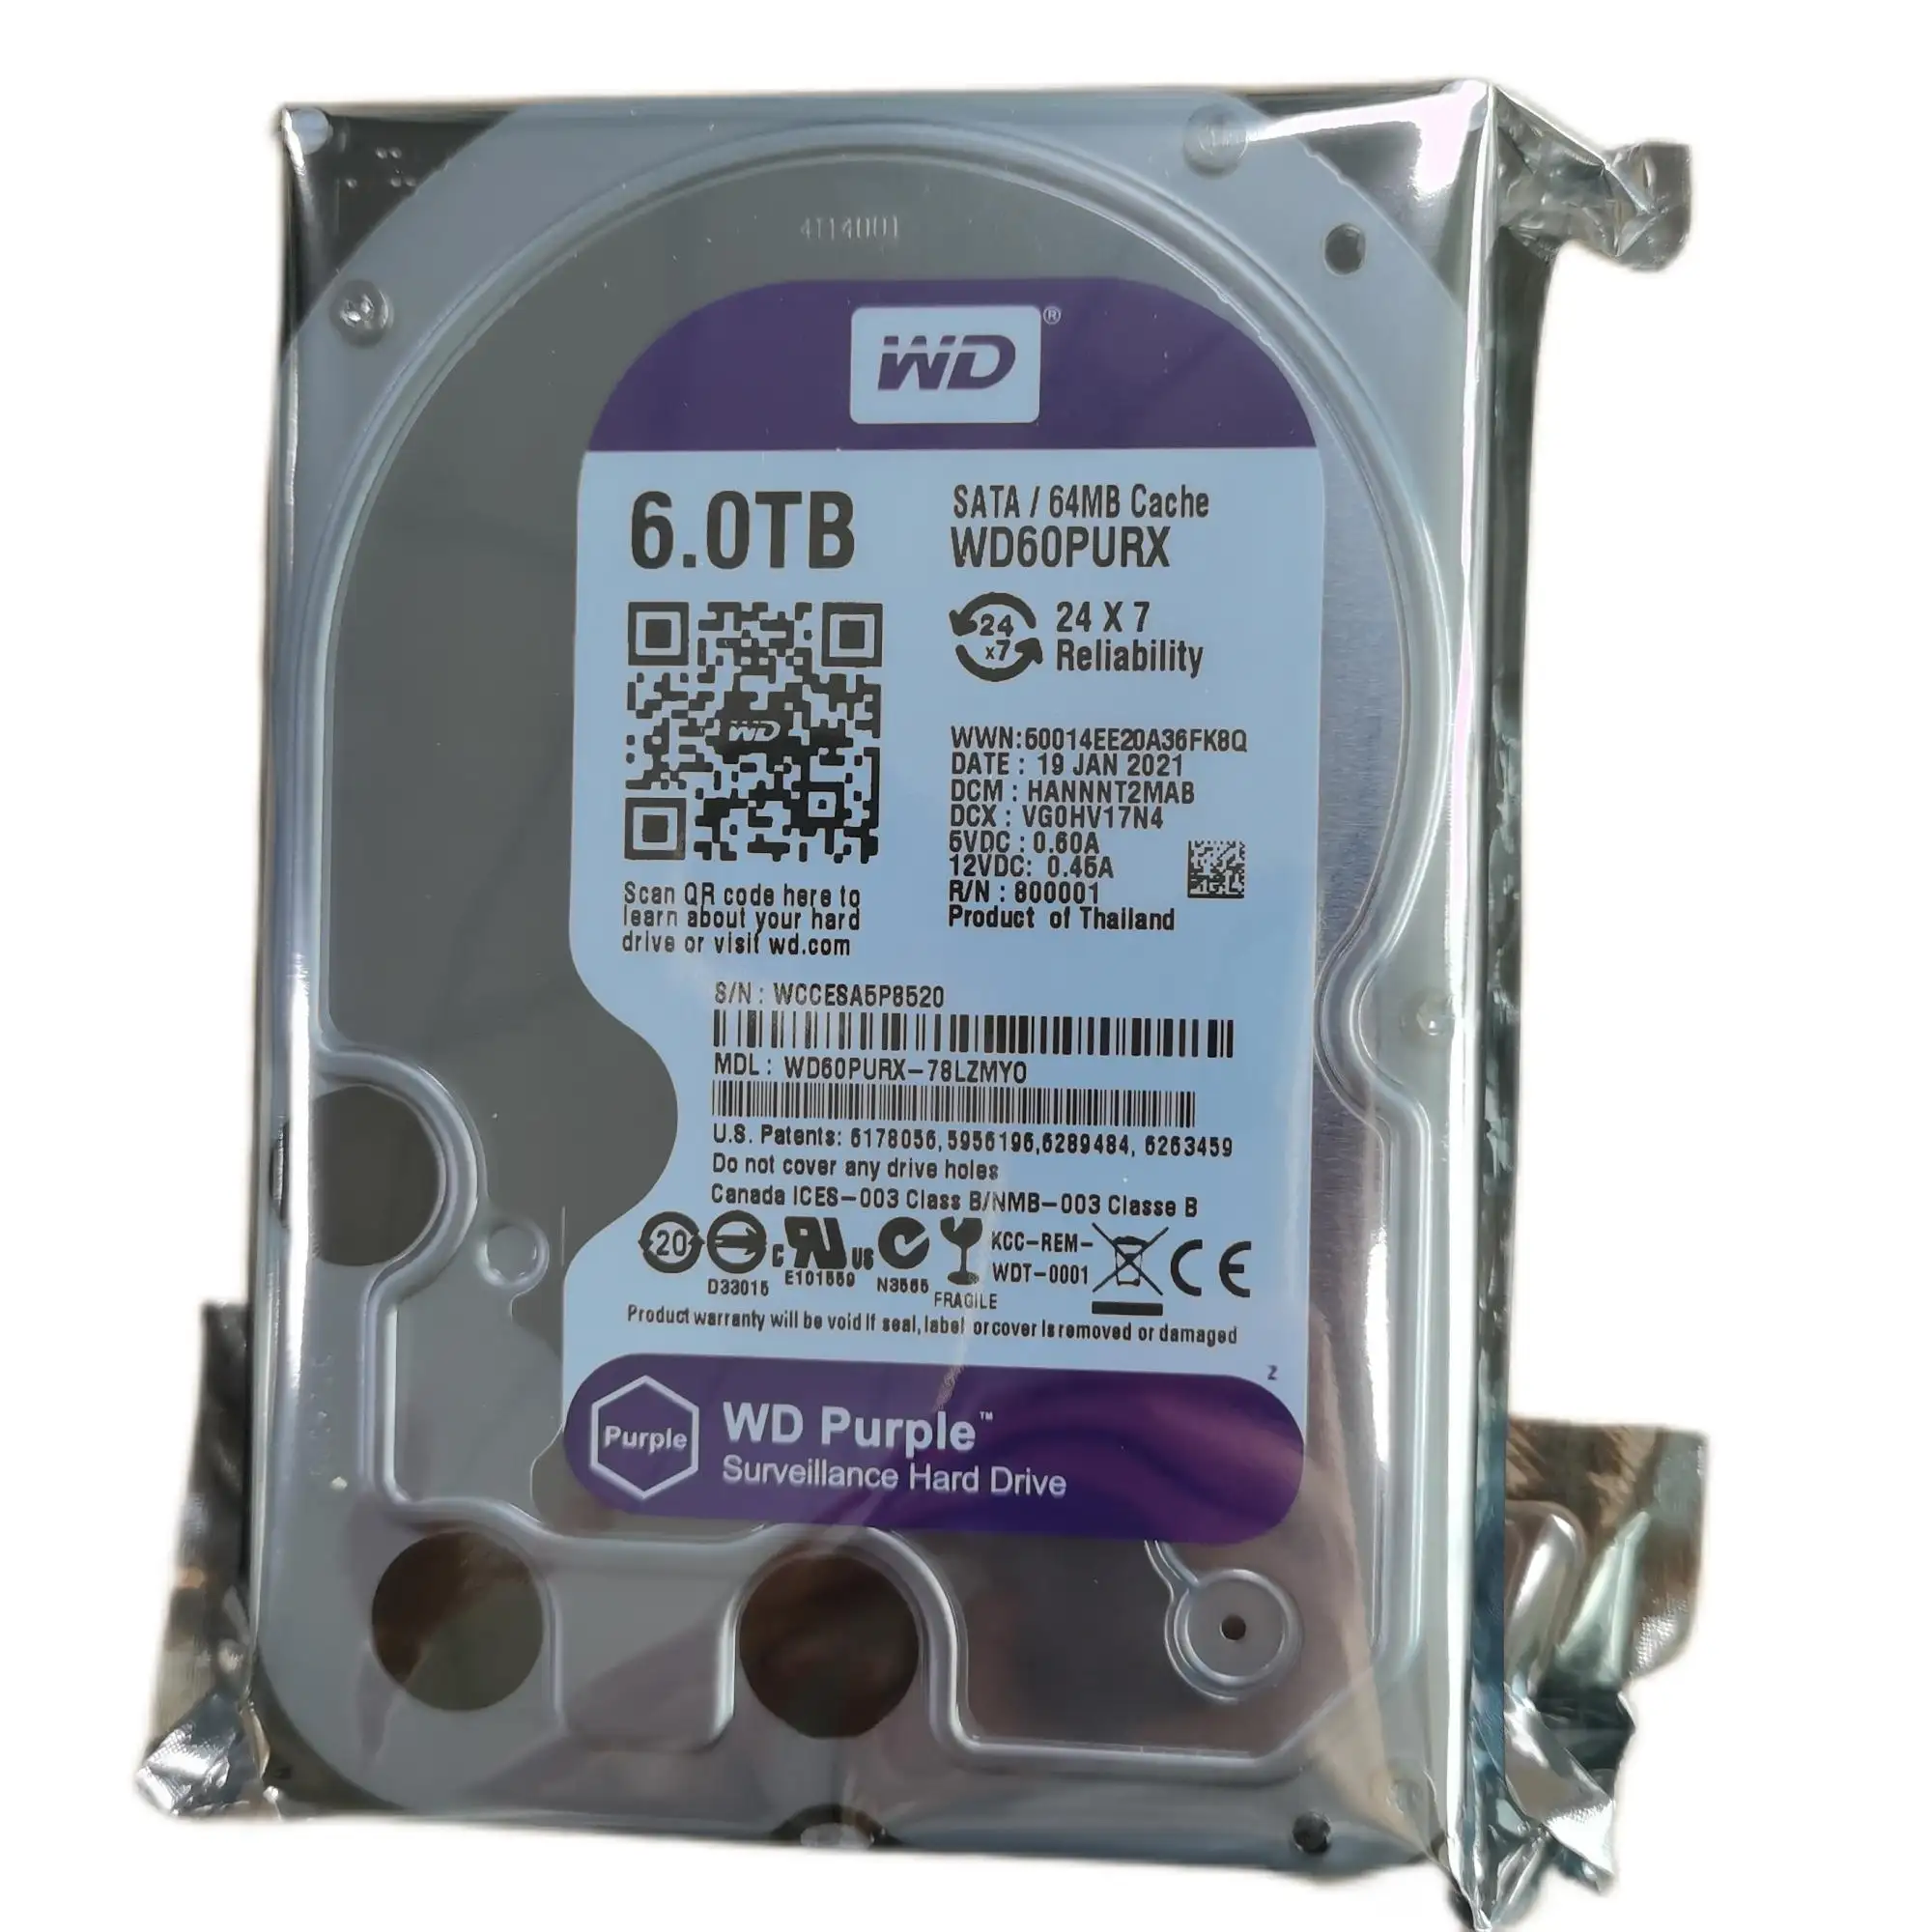 Hot selling hdd 120G 160G 320G 500GB 1TB 2TB 3TB 4TB 6TB 8TB 10TB 12TB 14TB 16TB 3.5 INCH hard disk for good price